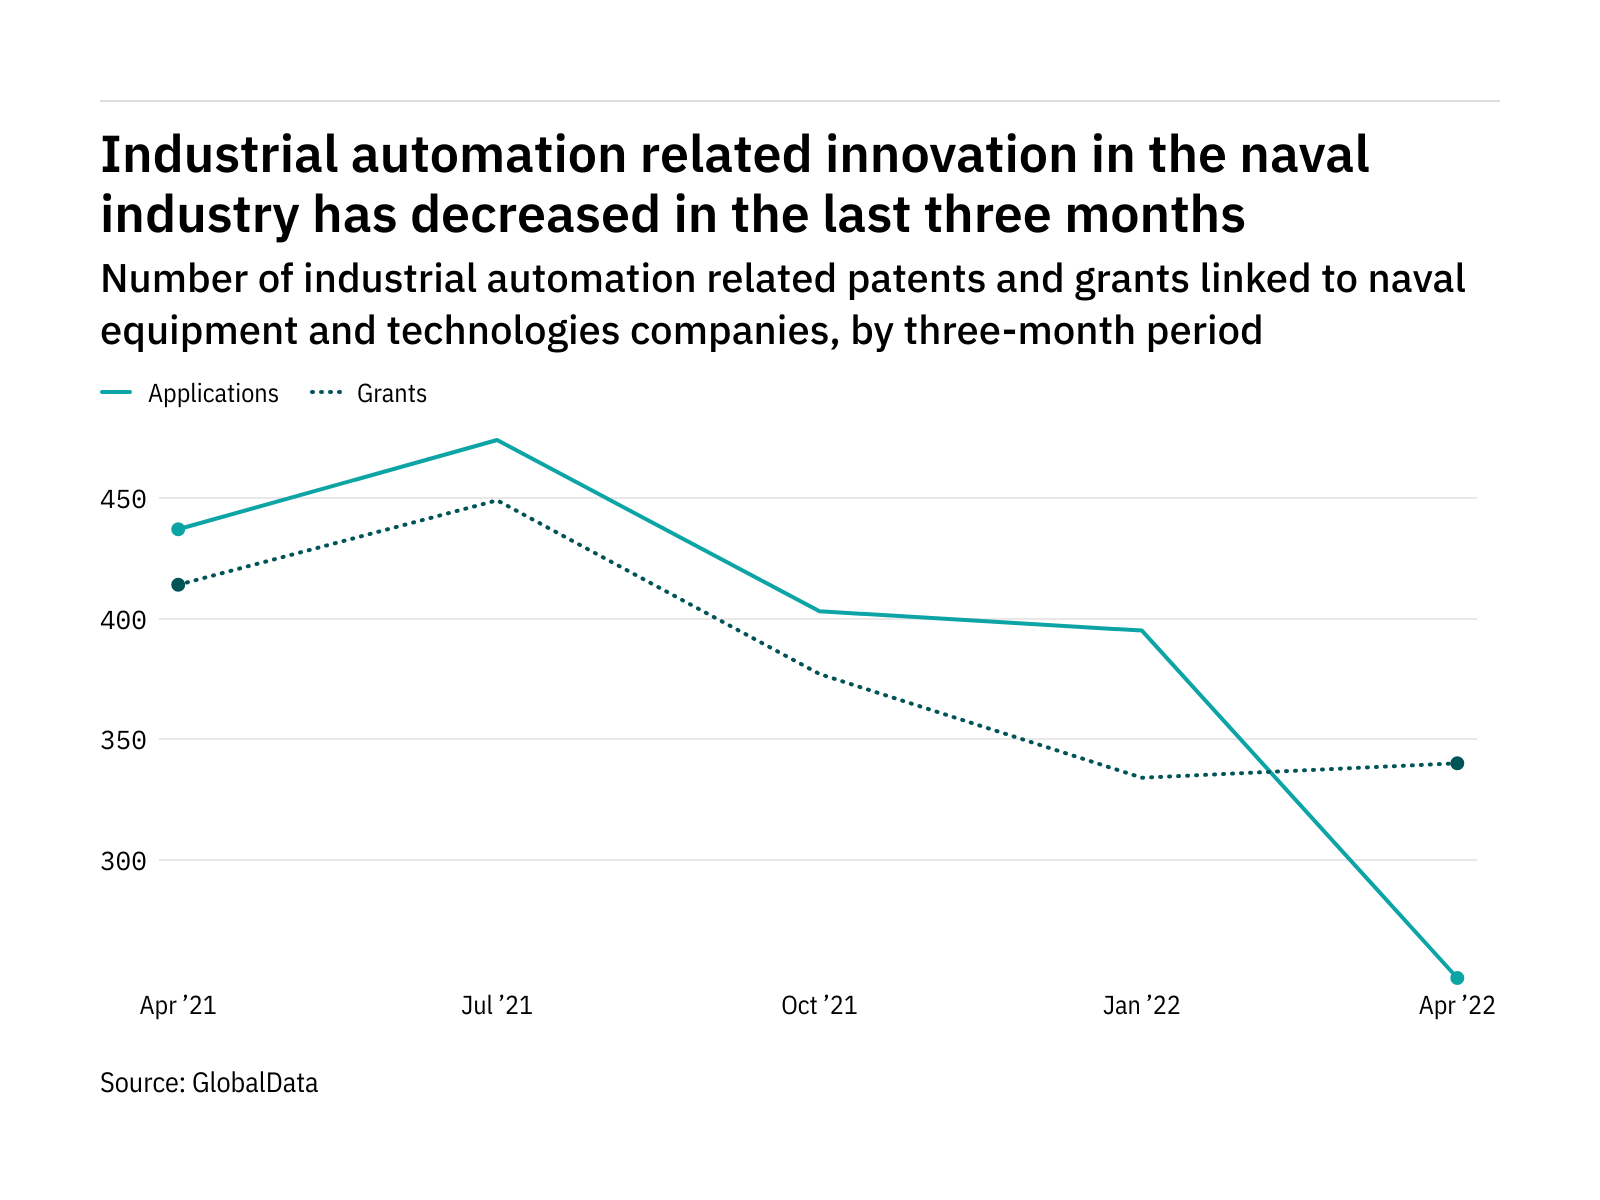 Industrial automation innovation among naval industry companies has dropped off in the last year